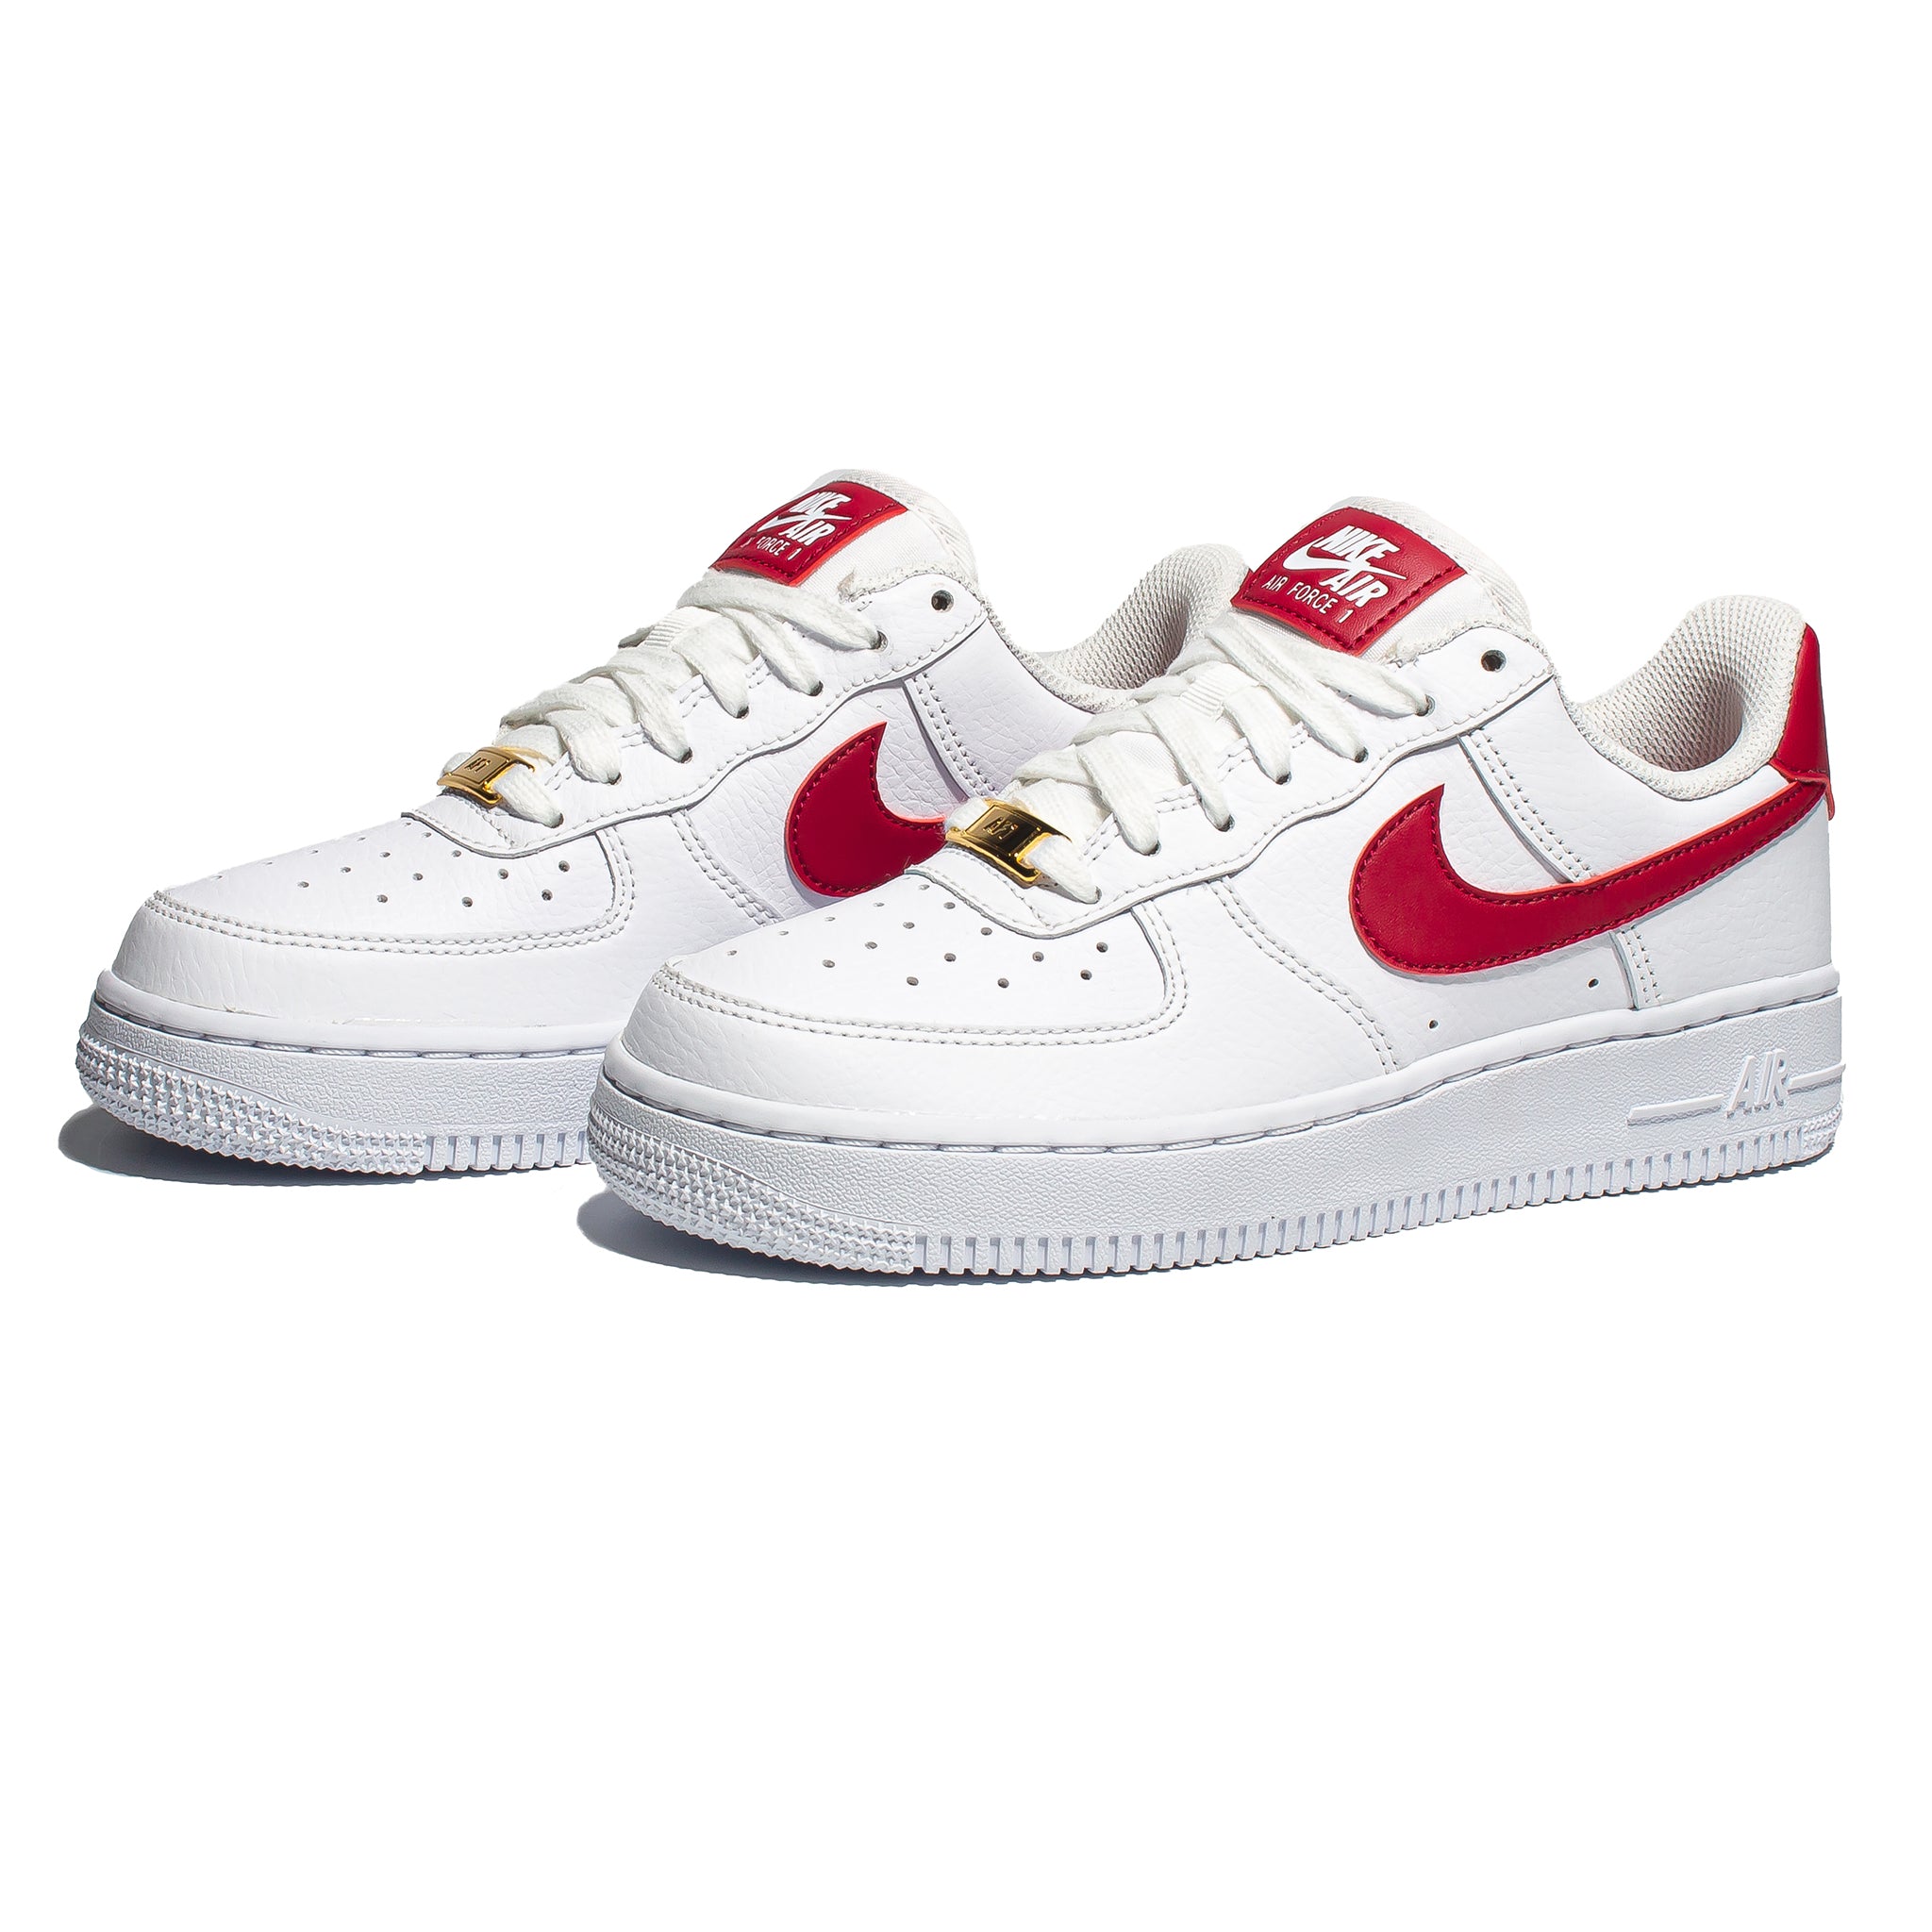 Nike Air Force 1 '07 'White/Gym Red'